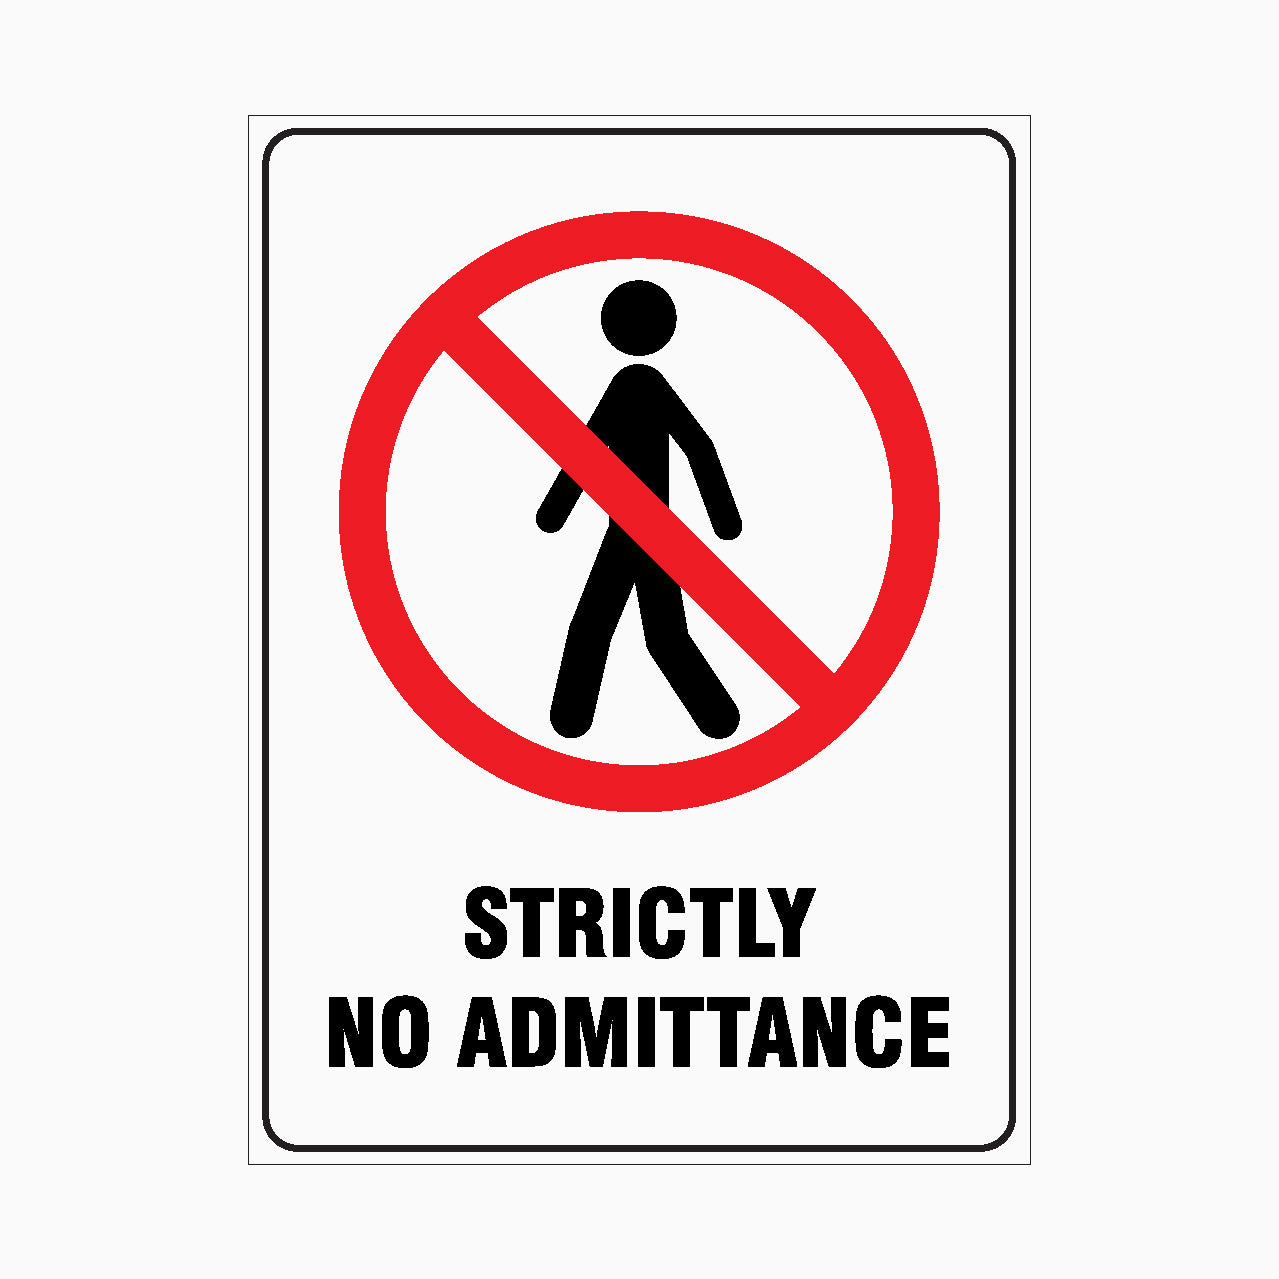 STRICTLY NO ADMITTANCE SIGN - prohibition signs